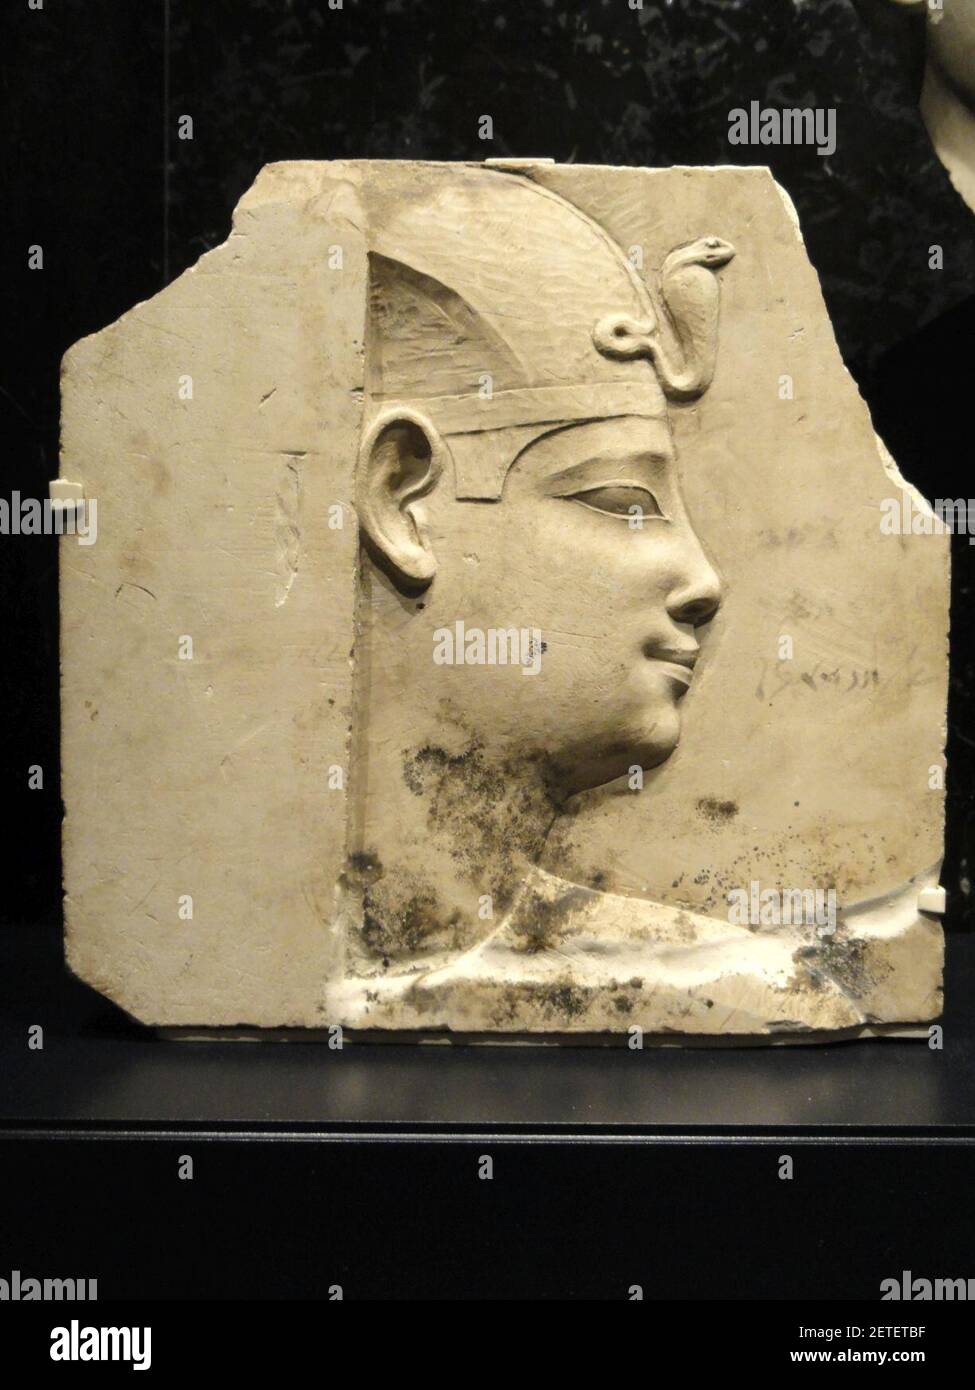 Pharaoh and two heads, two-sided relief, Egypt, Late Period to Ptolemaic Period, 26th Dynasty to Ptolemaic Dynasty, 664-32 BCE Stock Photo